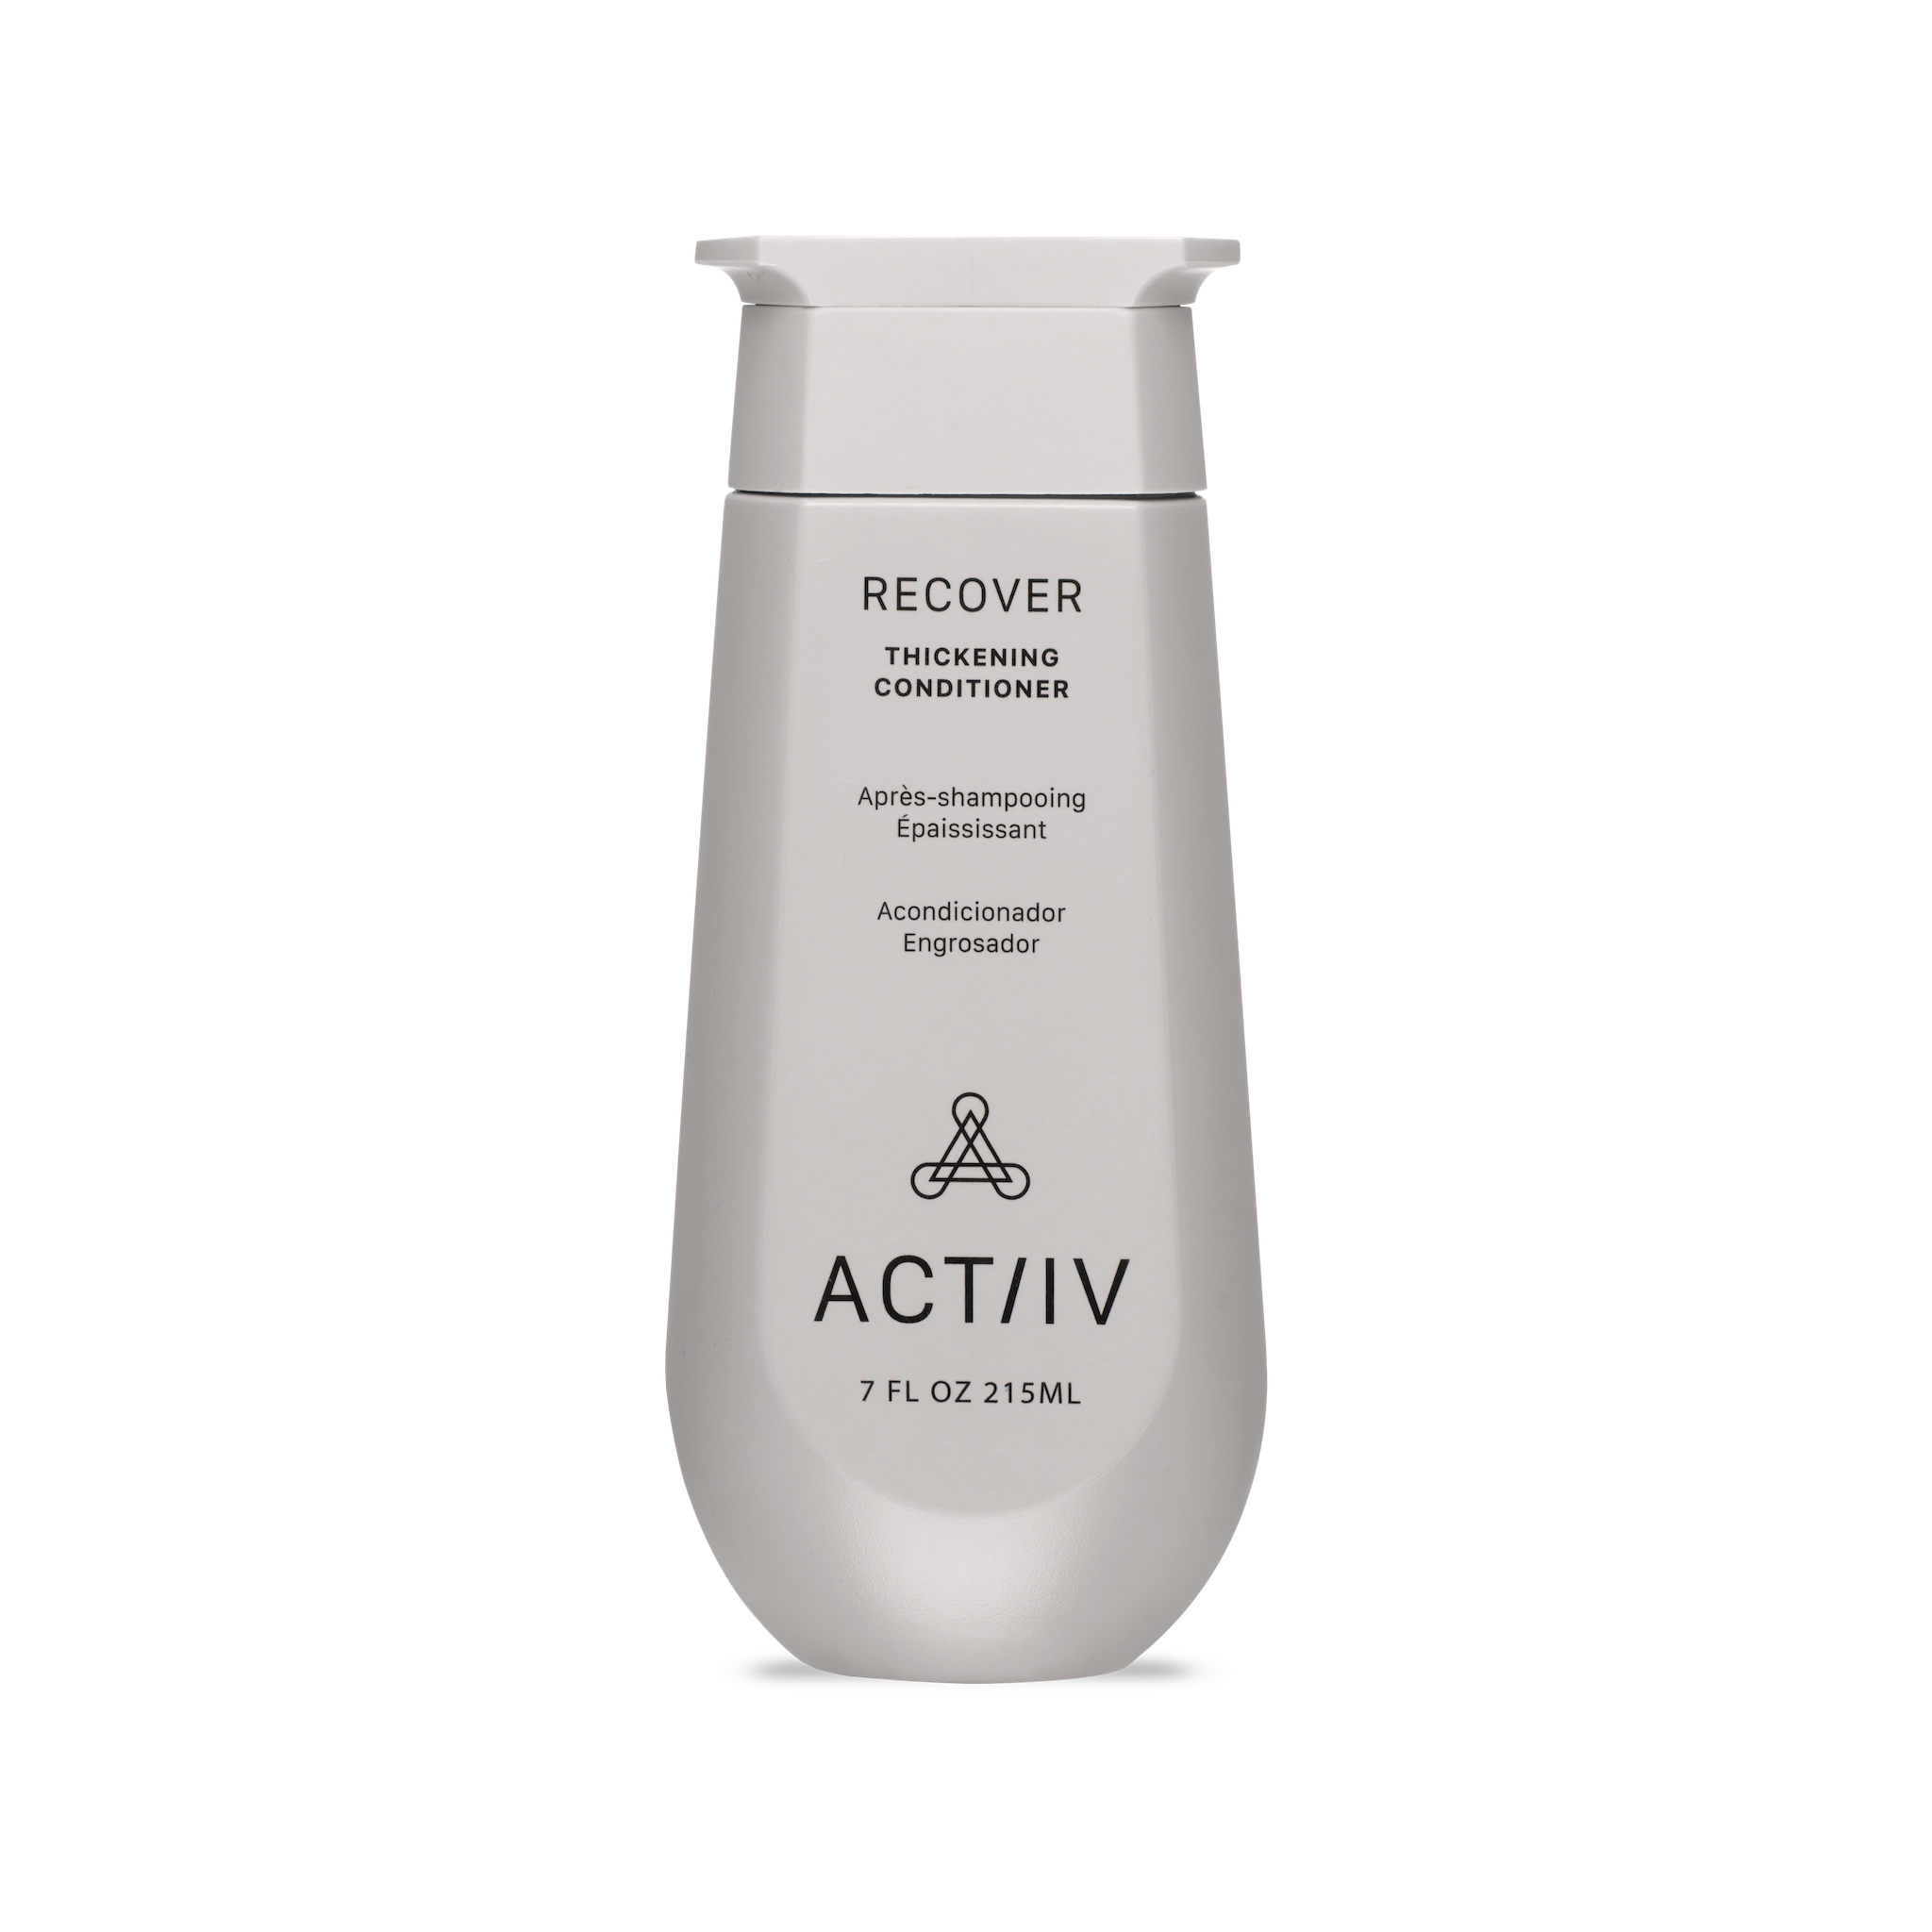 Actiiv Recover Thickening Conditioner 7oz Bottle